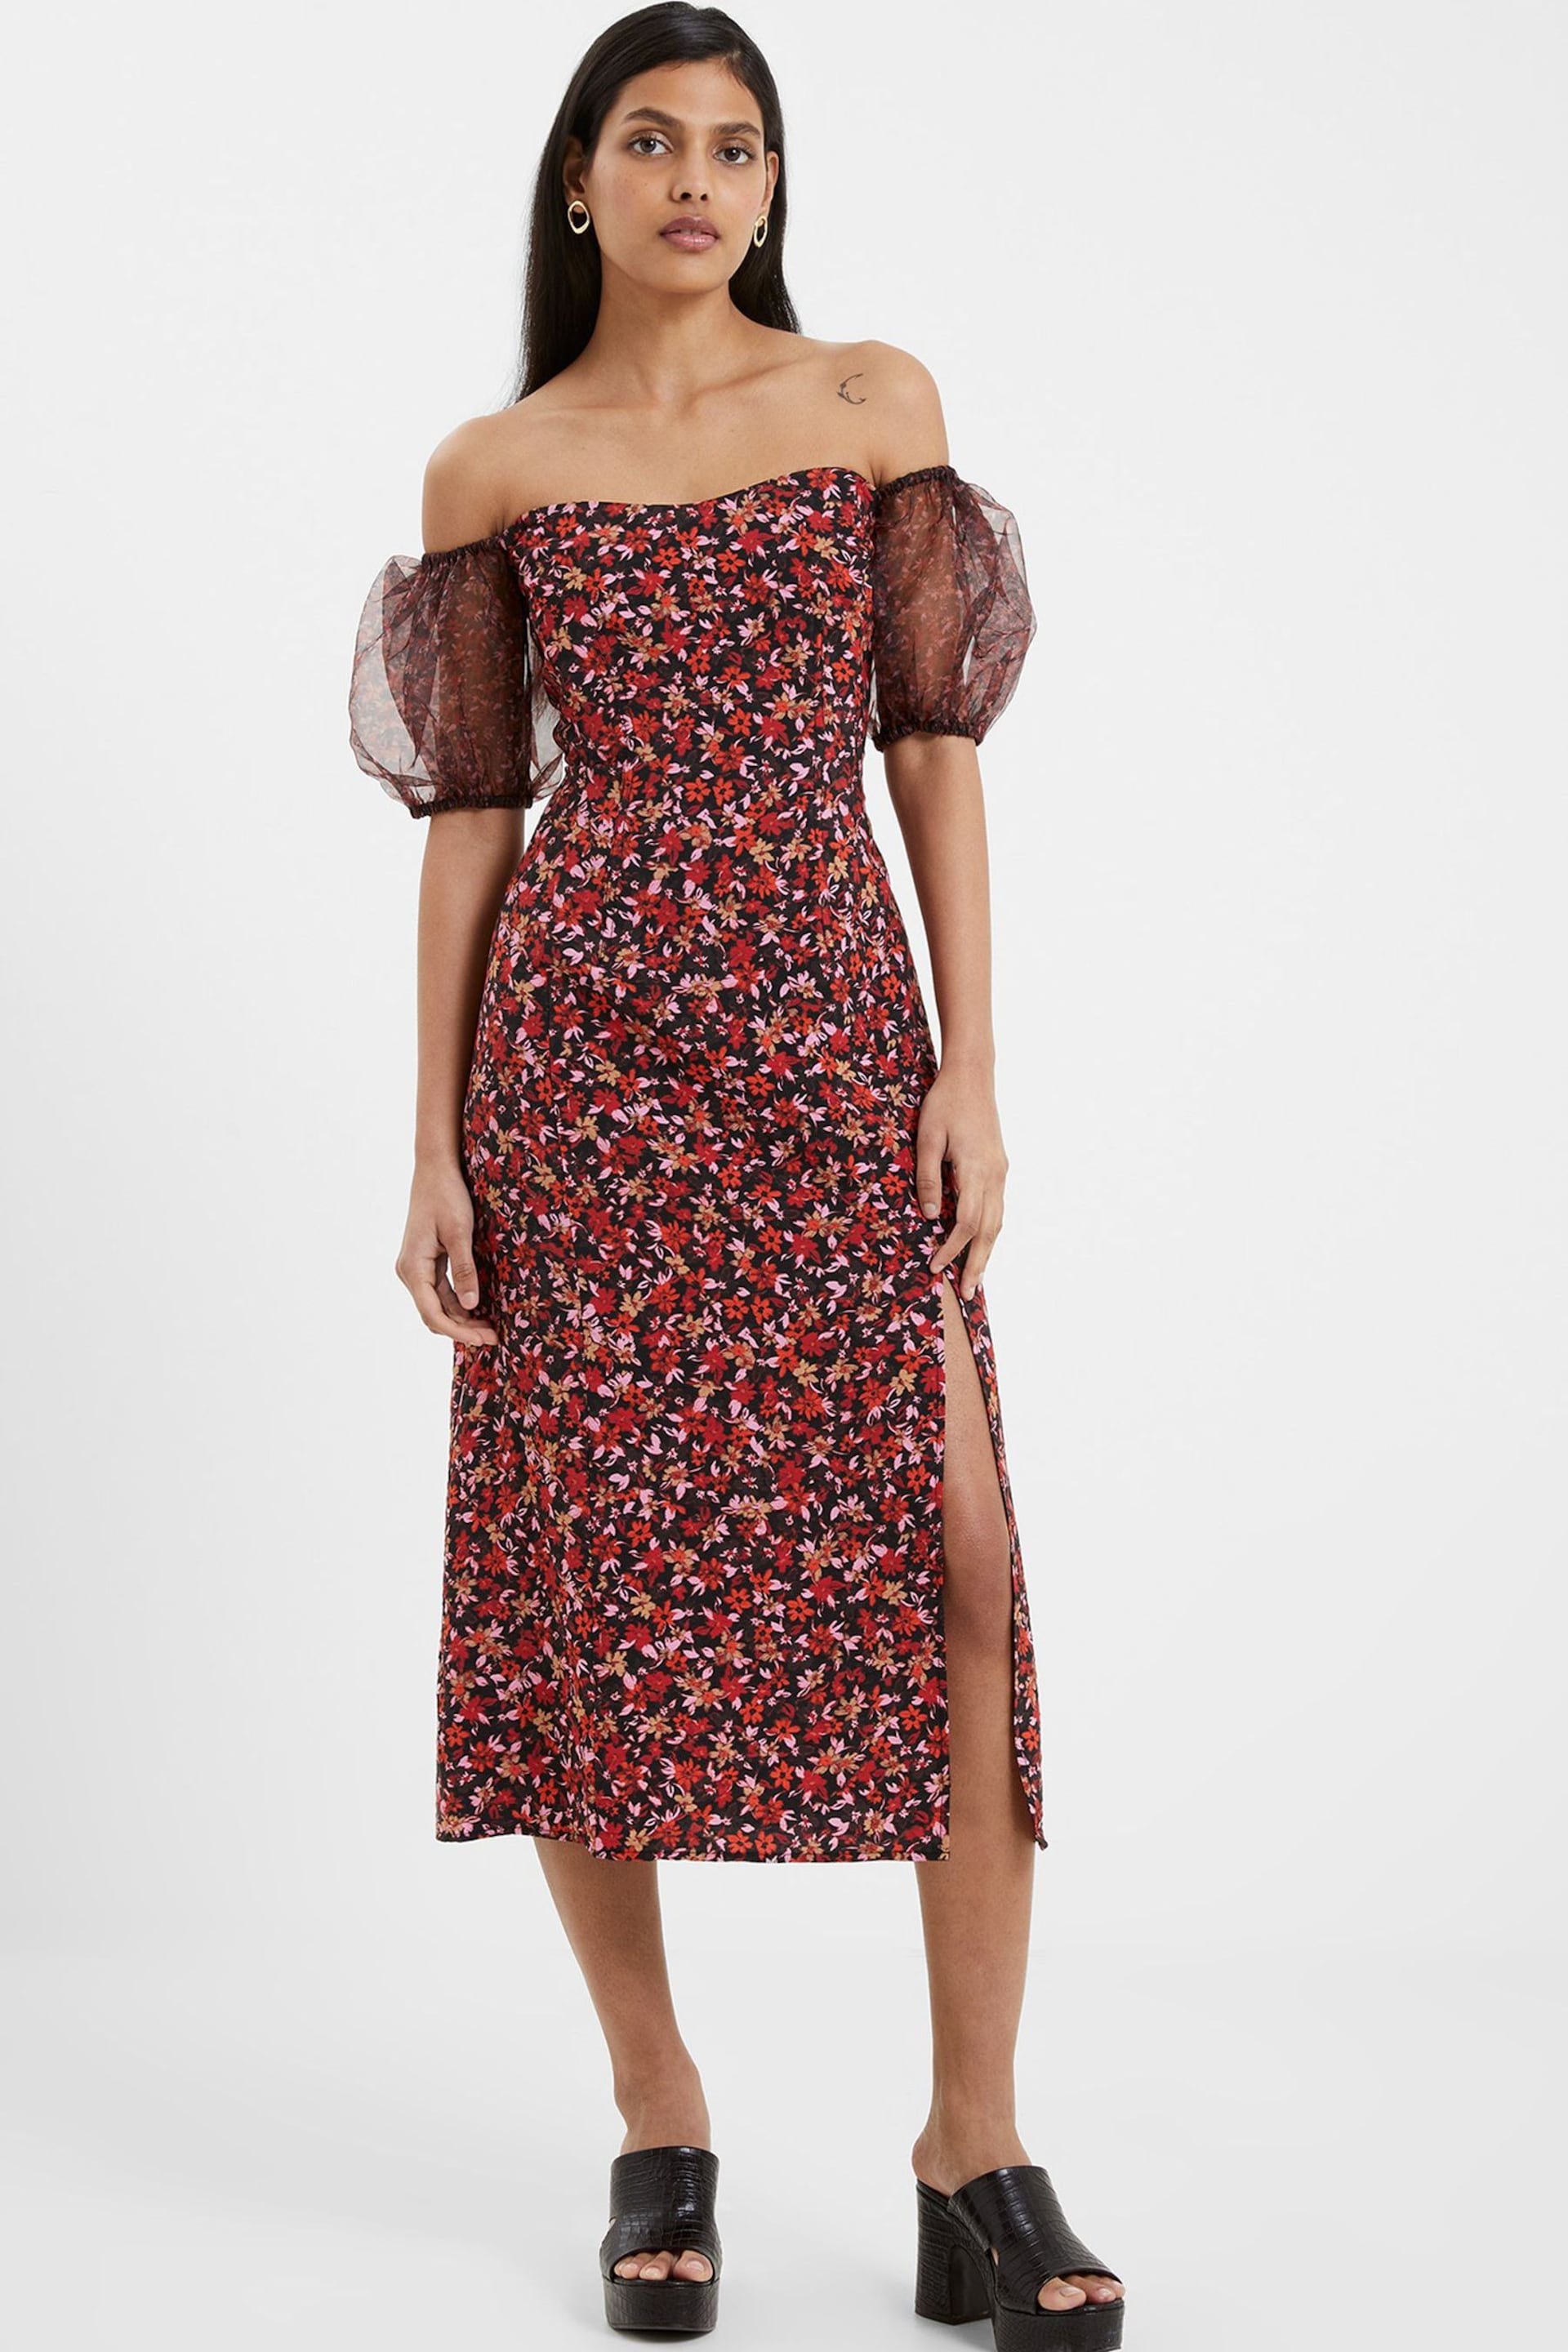 French Connection Clara Aflavia Puff Sleeve Dress - Image 1 of 4